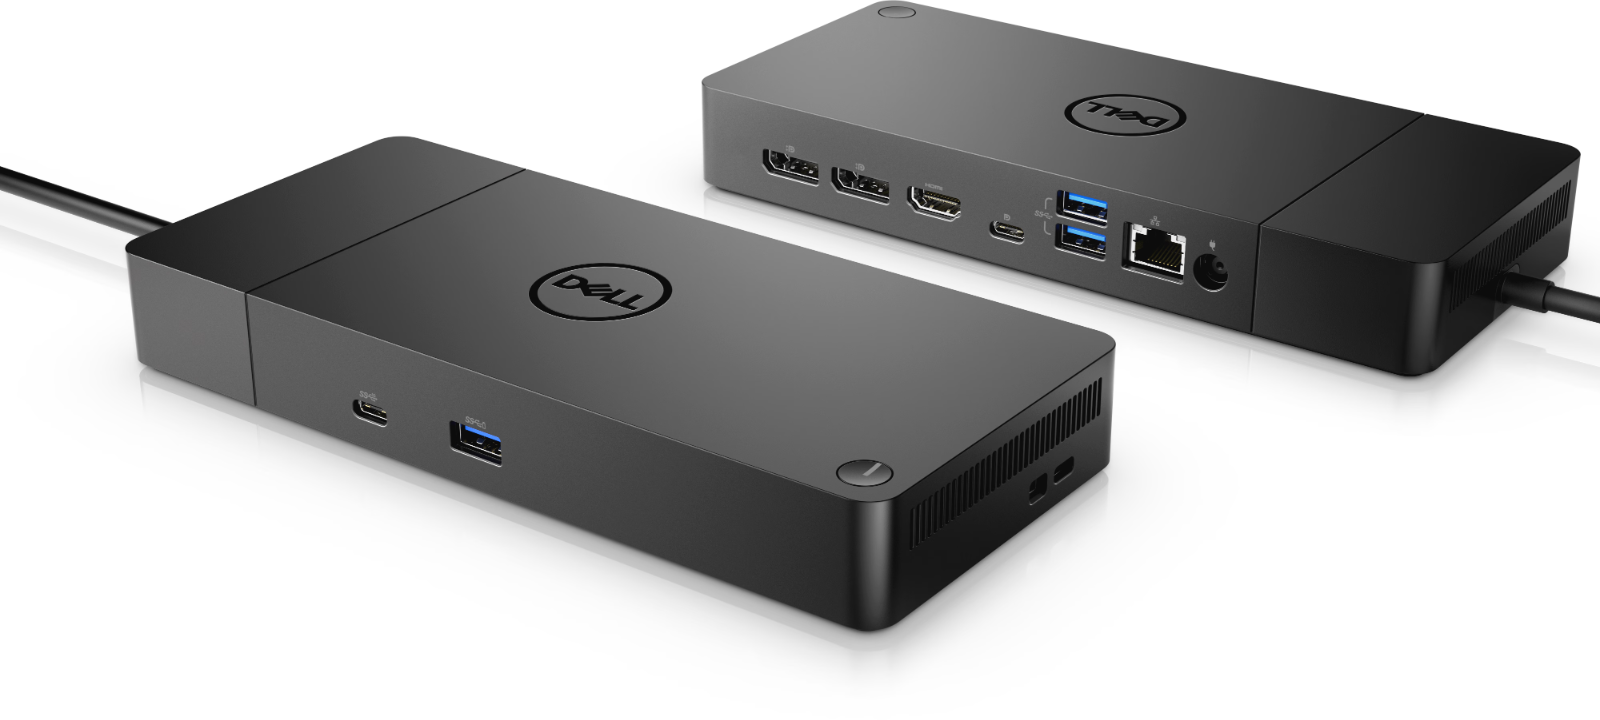 Dell WD19 Display Link Ultra HD Super Speed USB 3.0 Docking Station with PSU